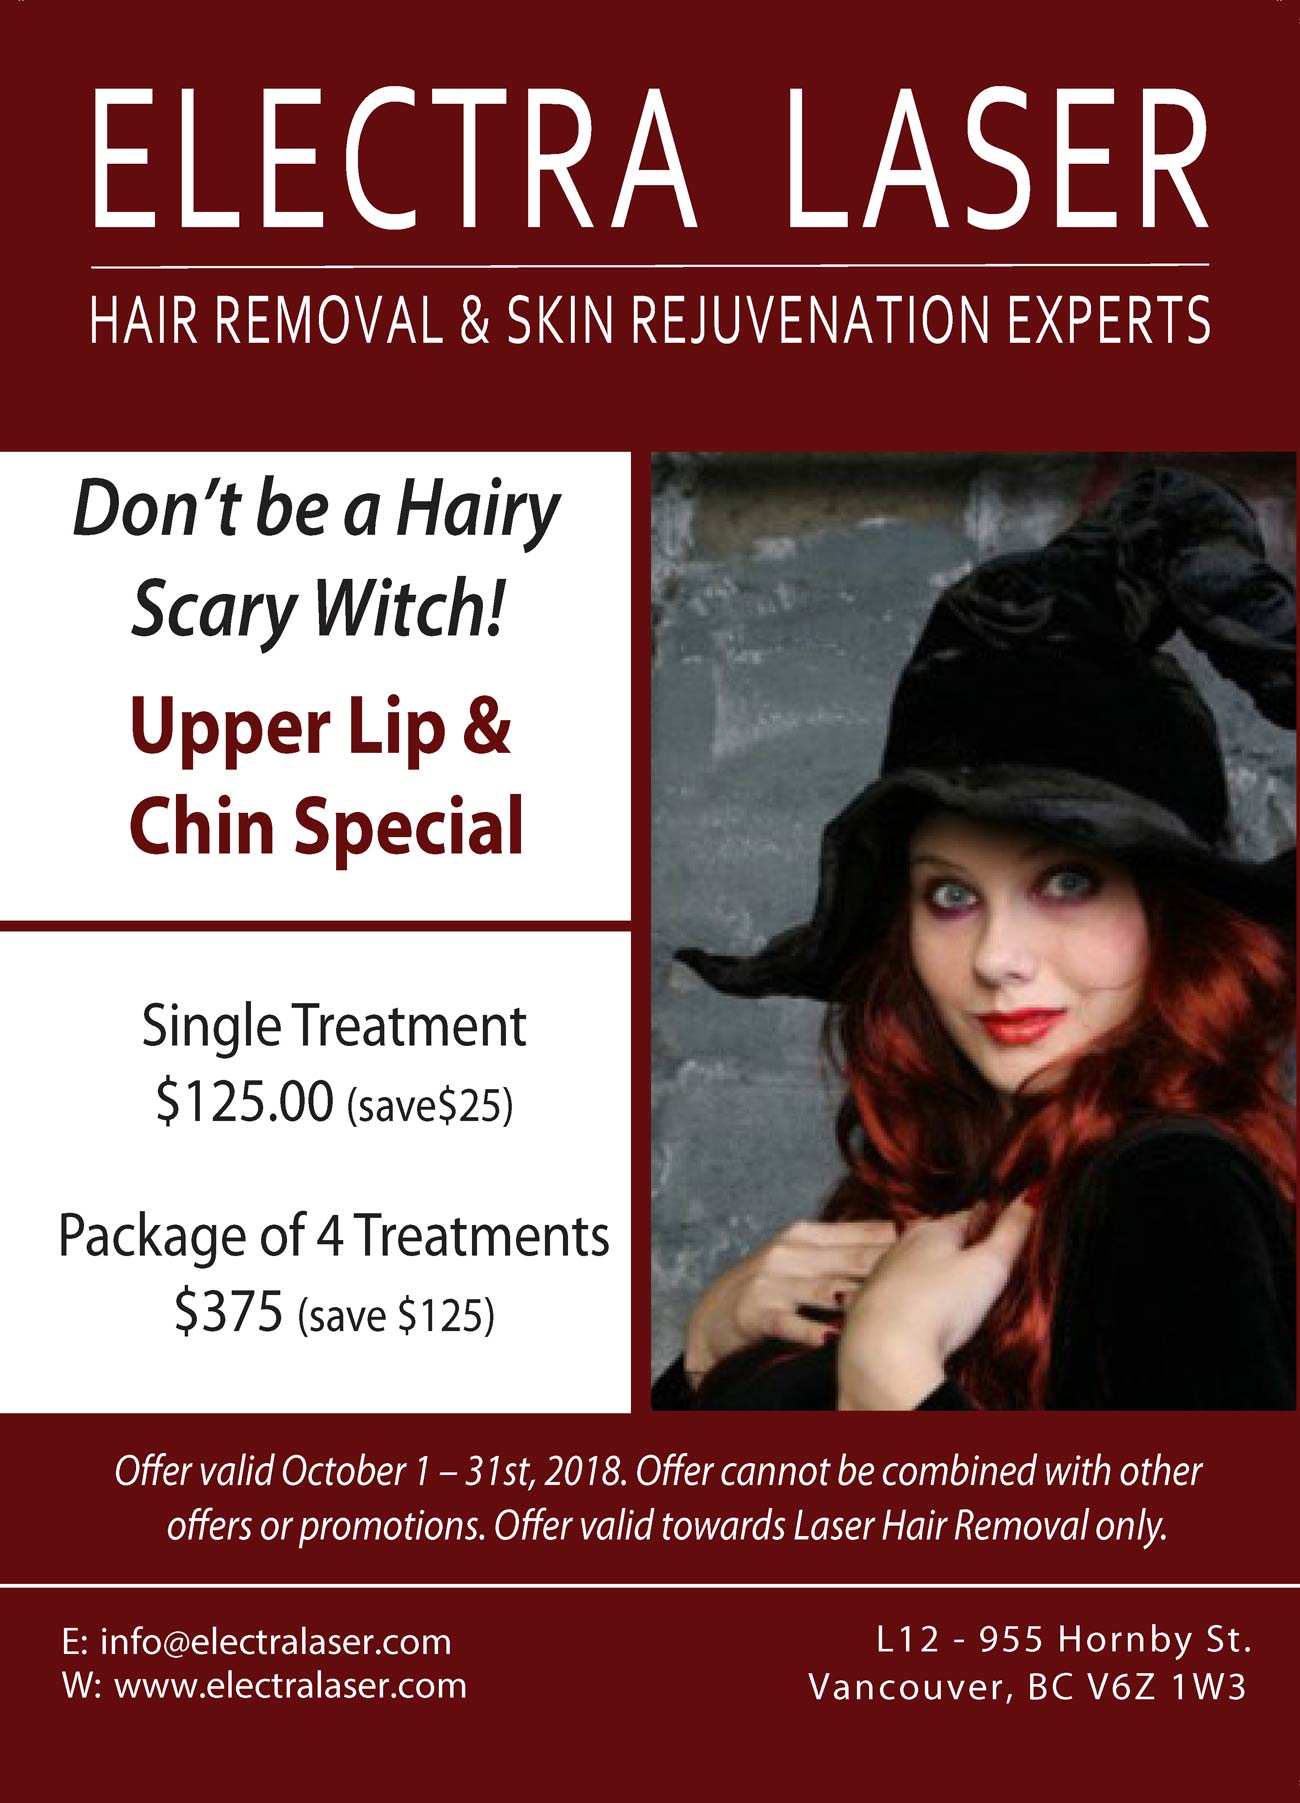 Check out our laser hair removal specials.